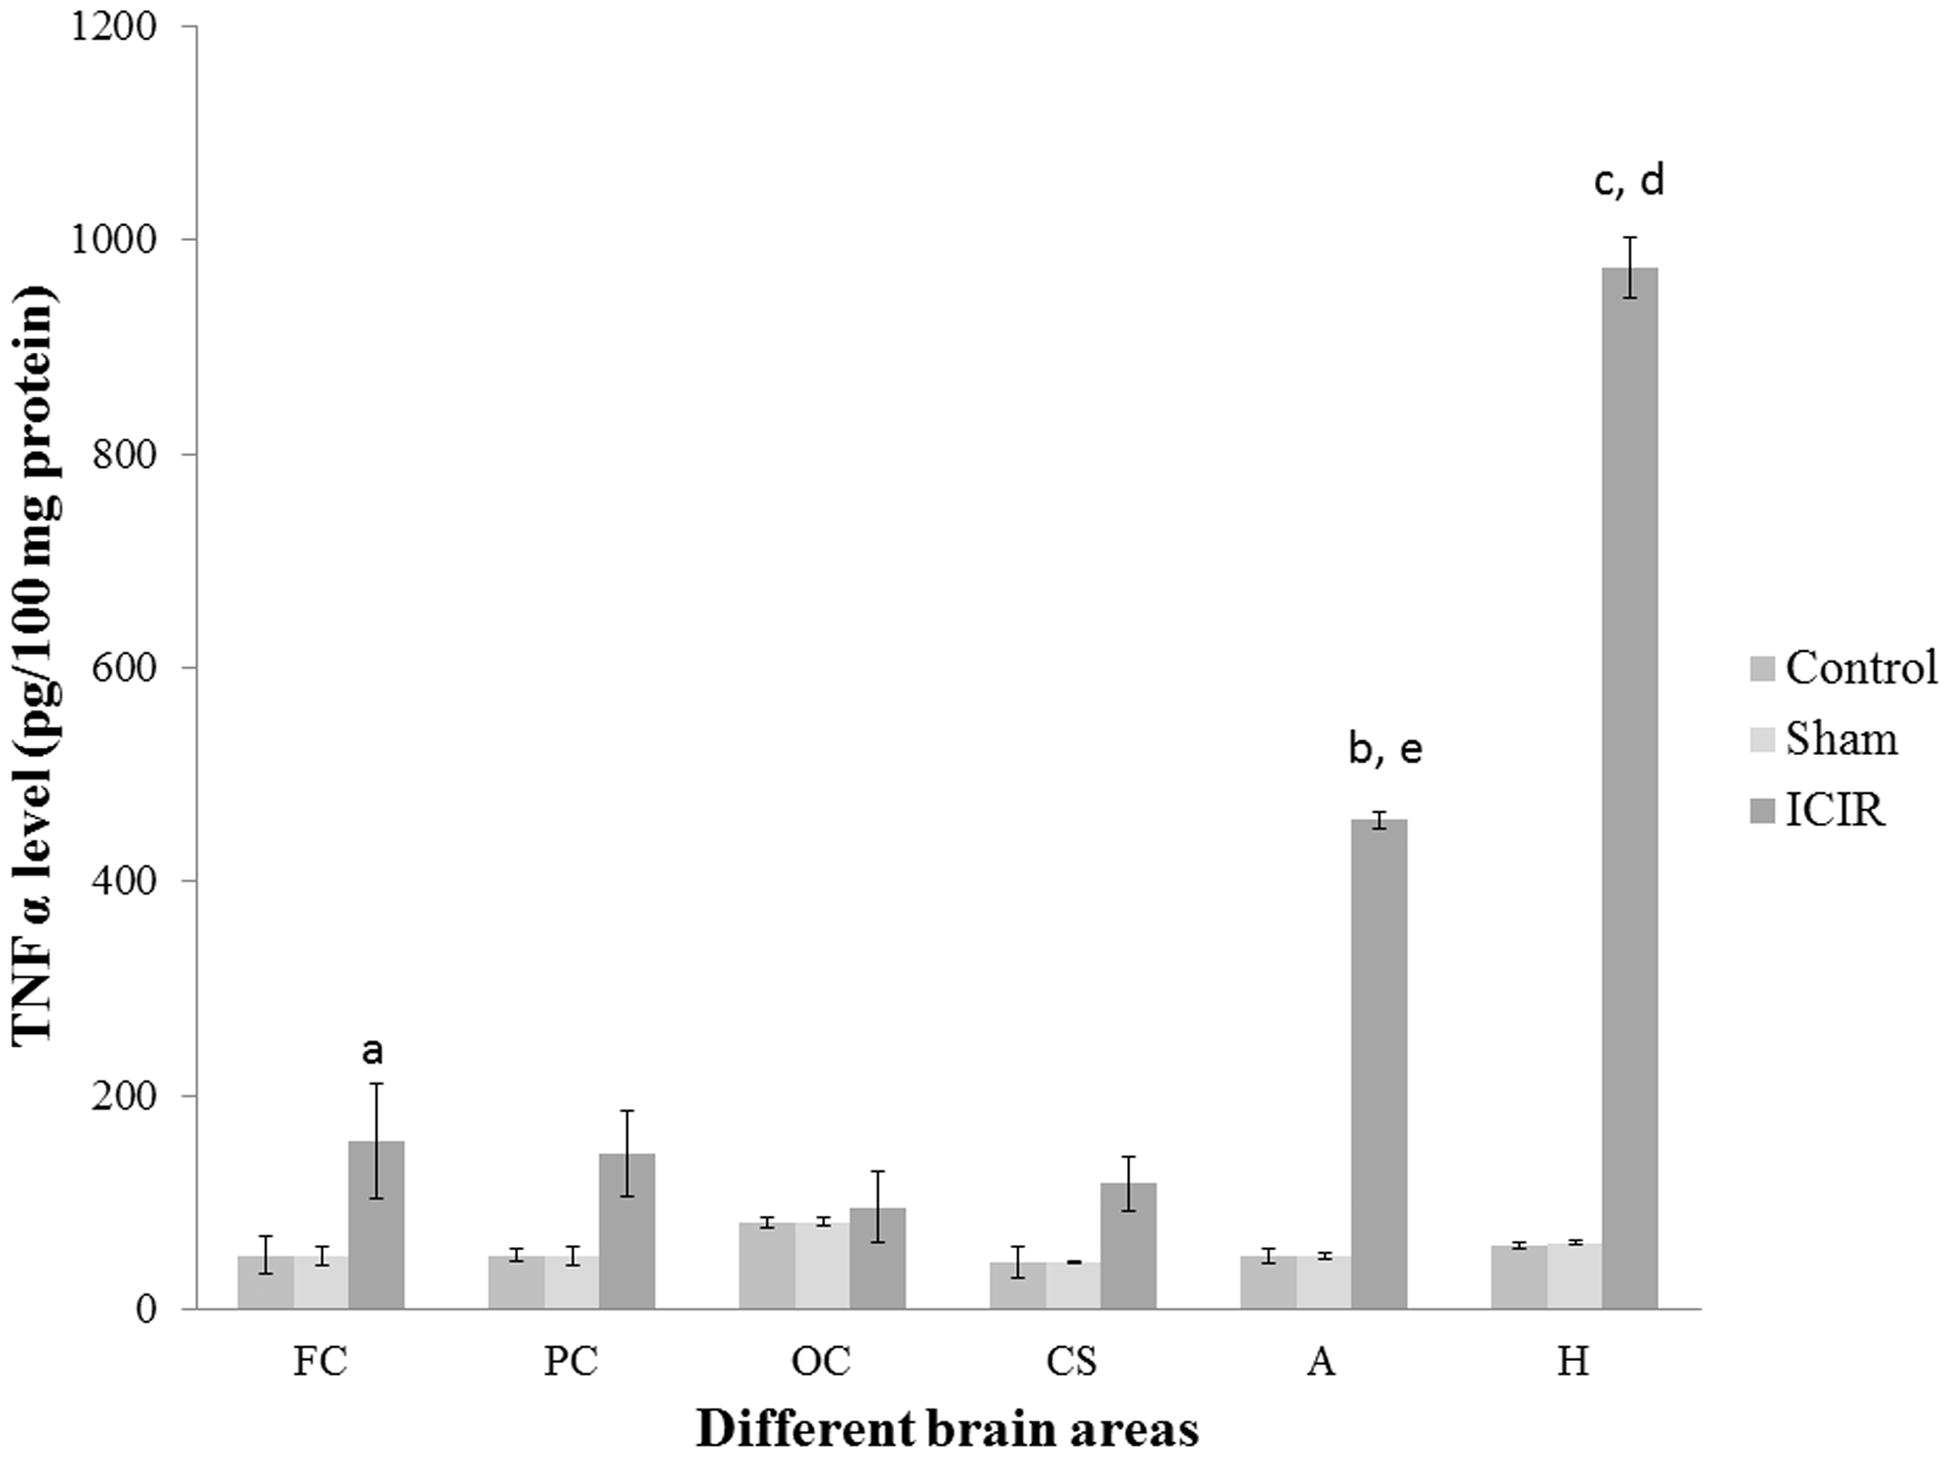 Figure 7. TNFα levels in different brain areas of rats. Significant difference between control (C)/sham-operated (S) rats vs ICIR hosts in (a) frontal cortex (p < 0.05), (b) amygdala (p < 0.001) and (c) hippocampus (p < 0.001). Significant difference (p < 0.001) between (d) hippo-campus/(e) amygdala vs frontal cortex, parietal cortex, occipital cortex and corpus striatum in ICIR hosts. Values shown are means ± SEM (n = 6/group). Abbreviations are as outlined in legend to Figure 3.